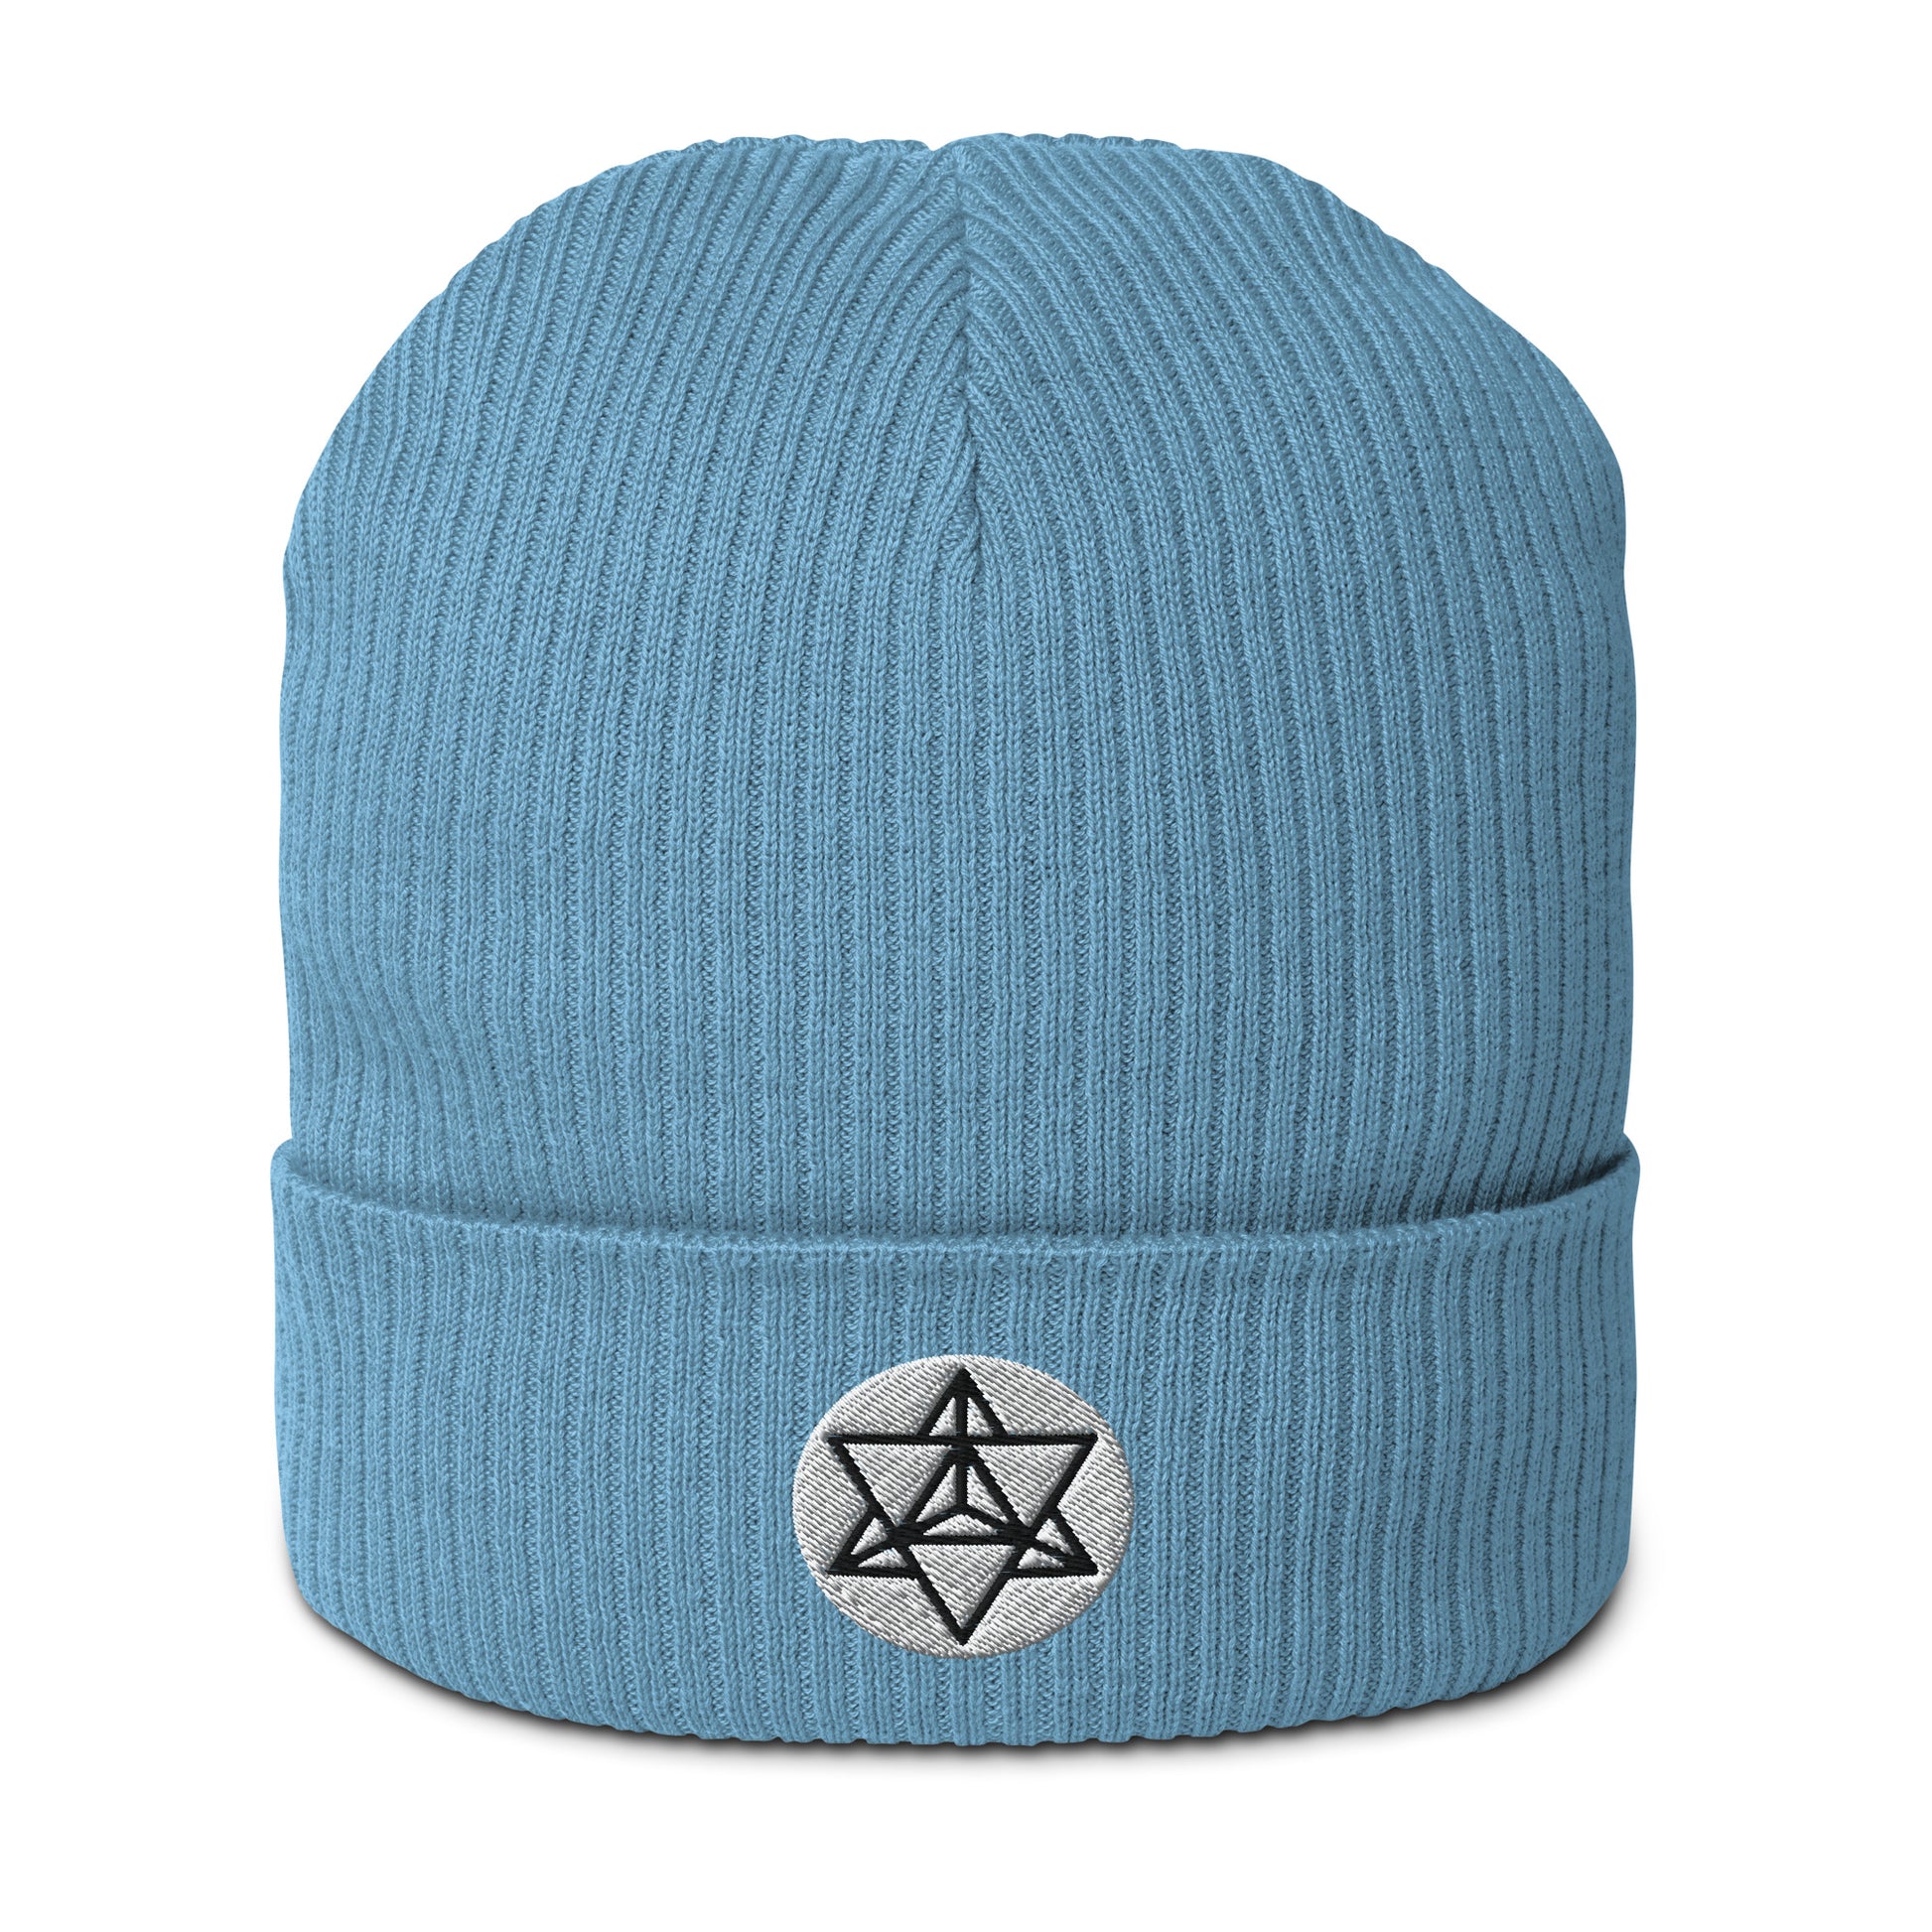 The Merkaba symbol beanie hat in Bermuda Blue, crafted from organic cotton and adorned with intricate embroidery. Symbolizing the journey of ascension and divine protection, the Merkaba represents profound spiritual transformation and unity of mind, body, and spirit. 